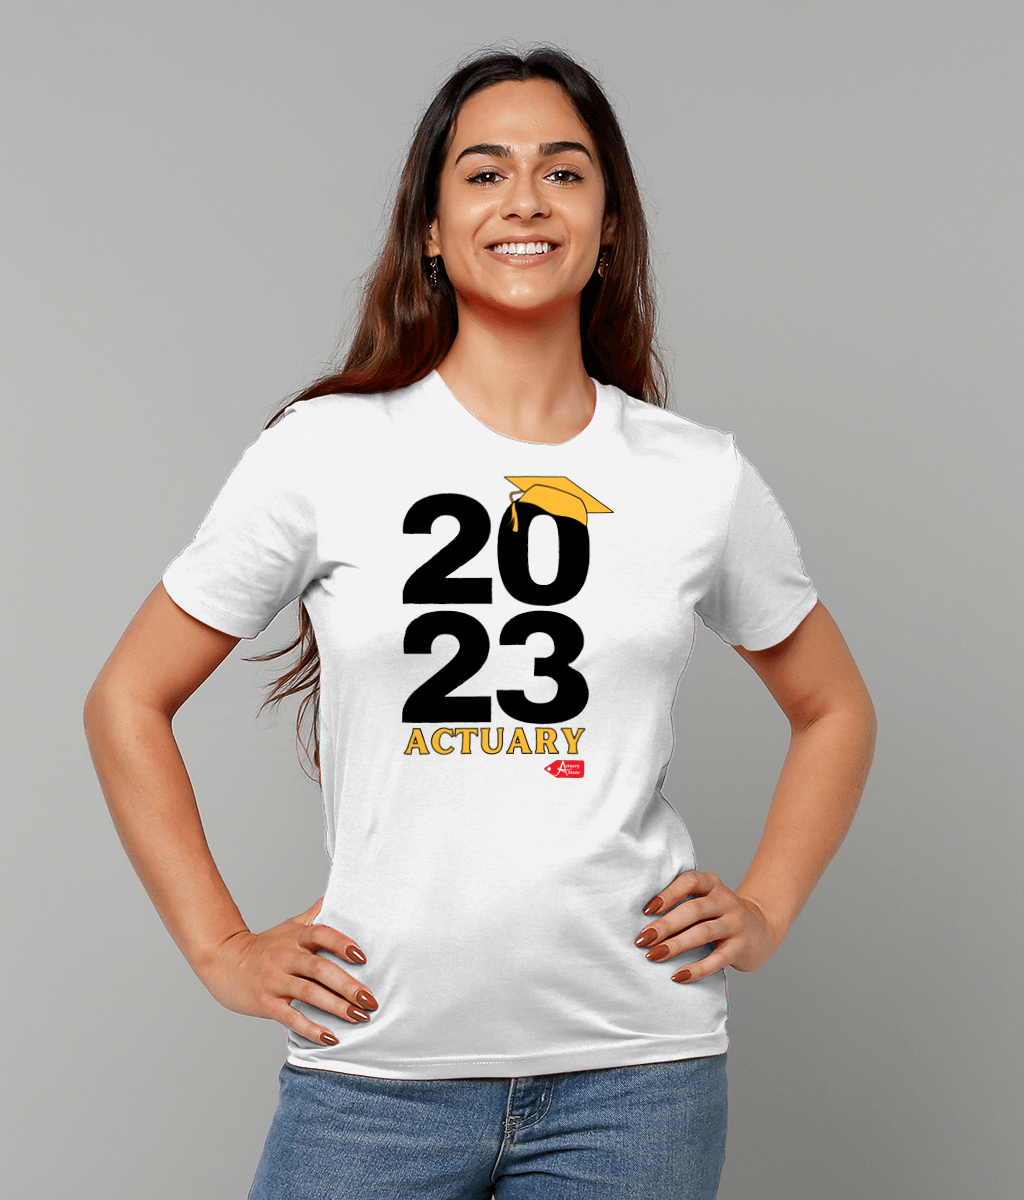 2023 Actuary Qualified White T-Shirt (Contact us to request for any other year)